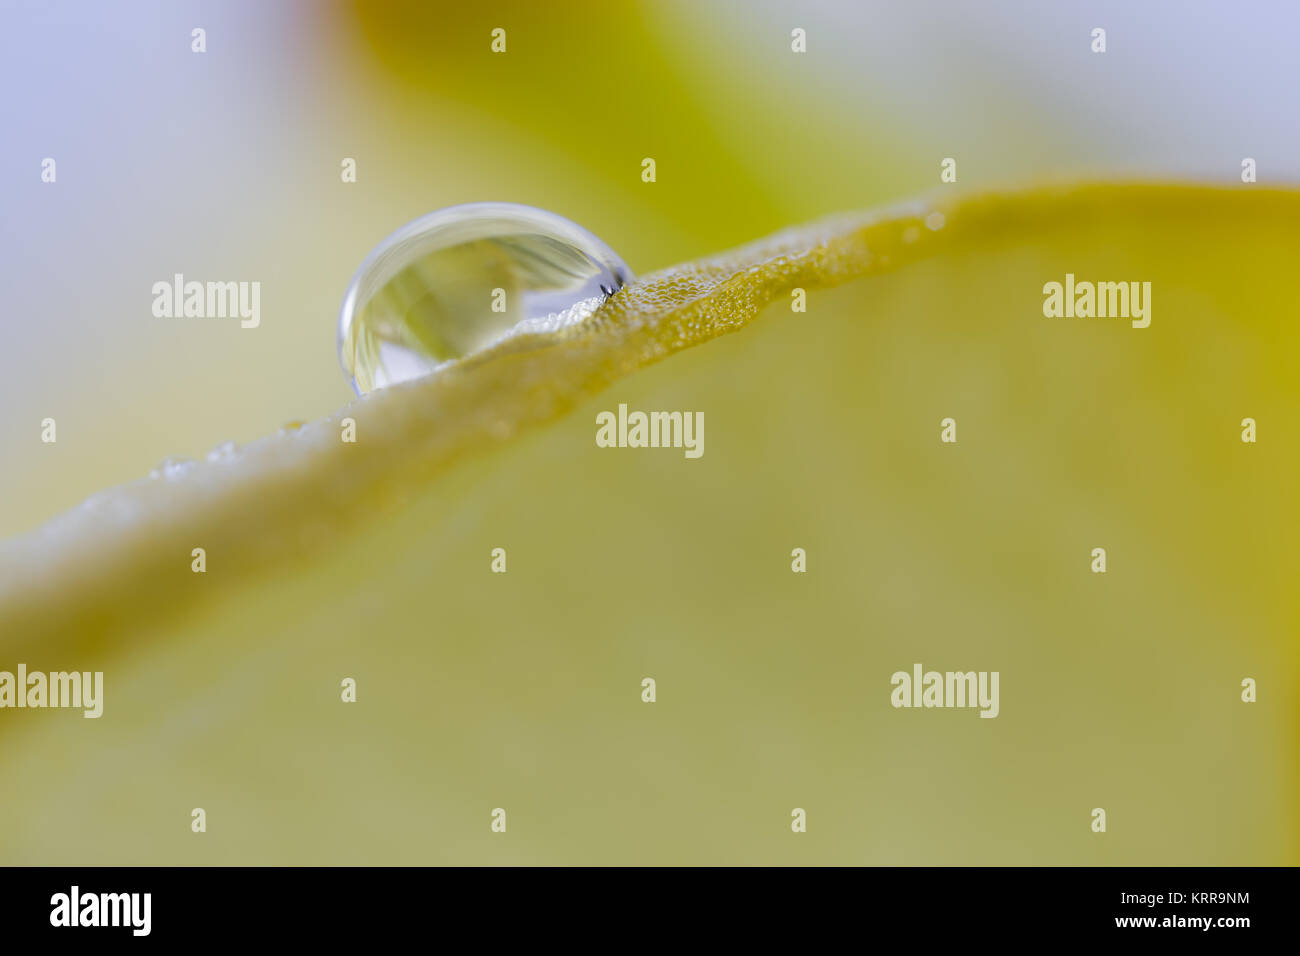 Drop of water on a petal of a yellow flower. Stock Photo